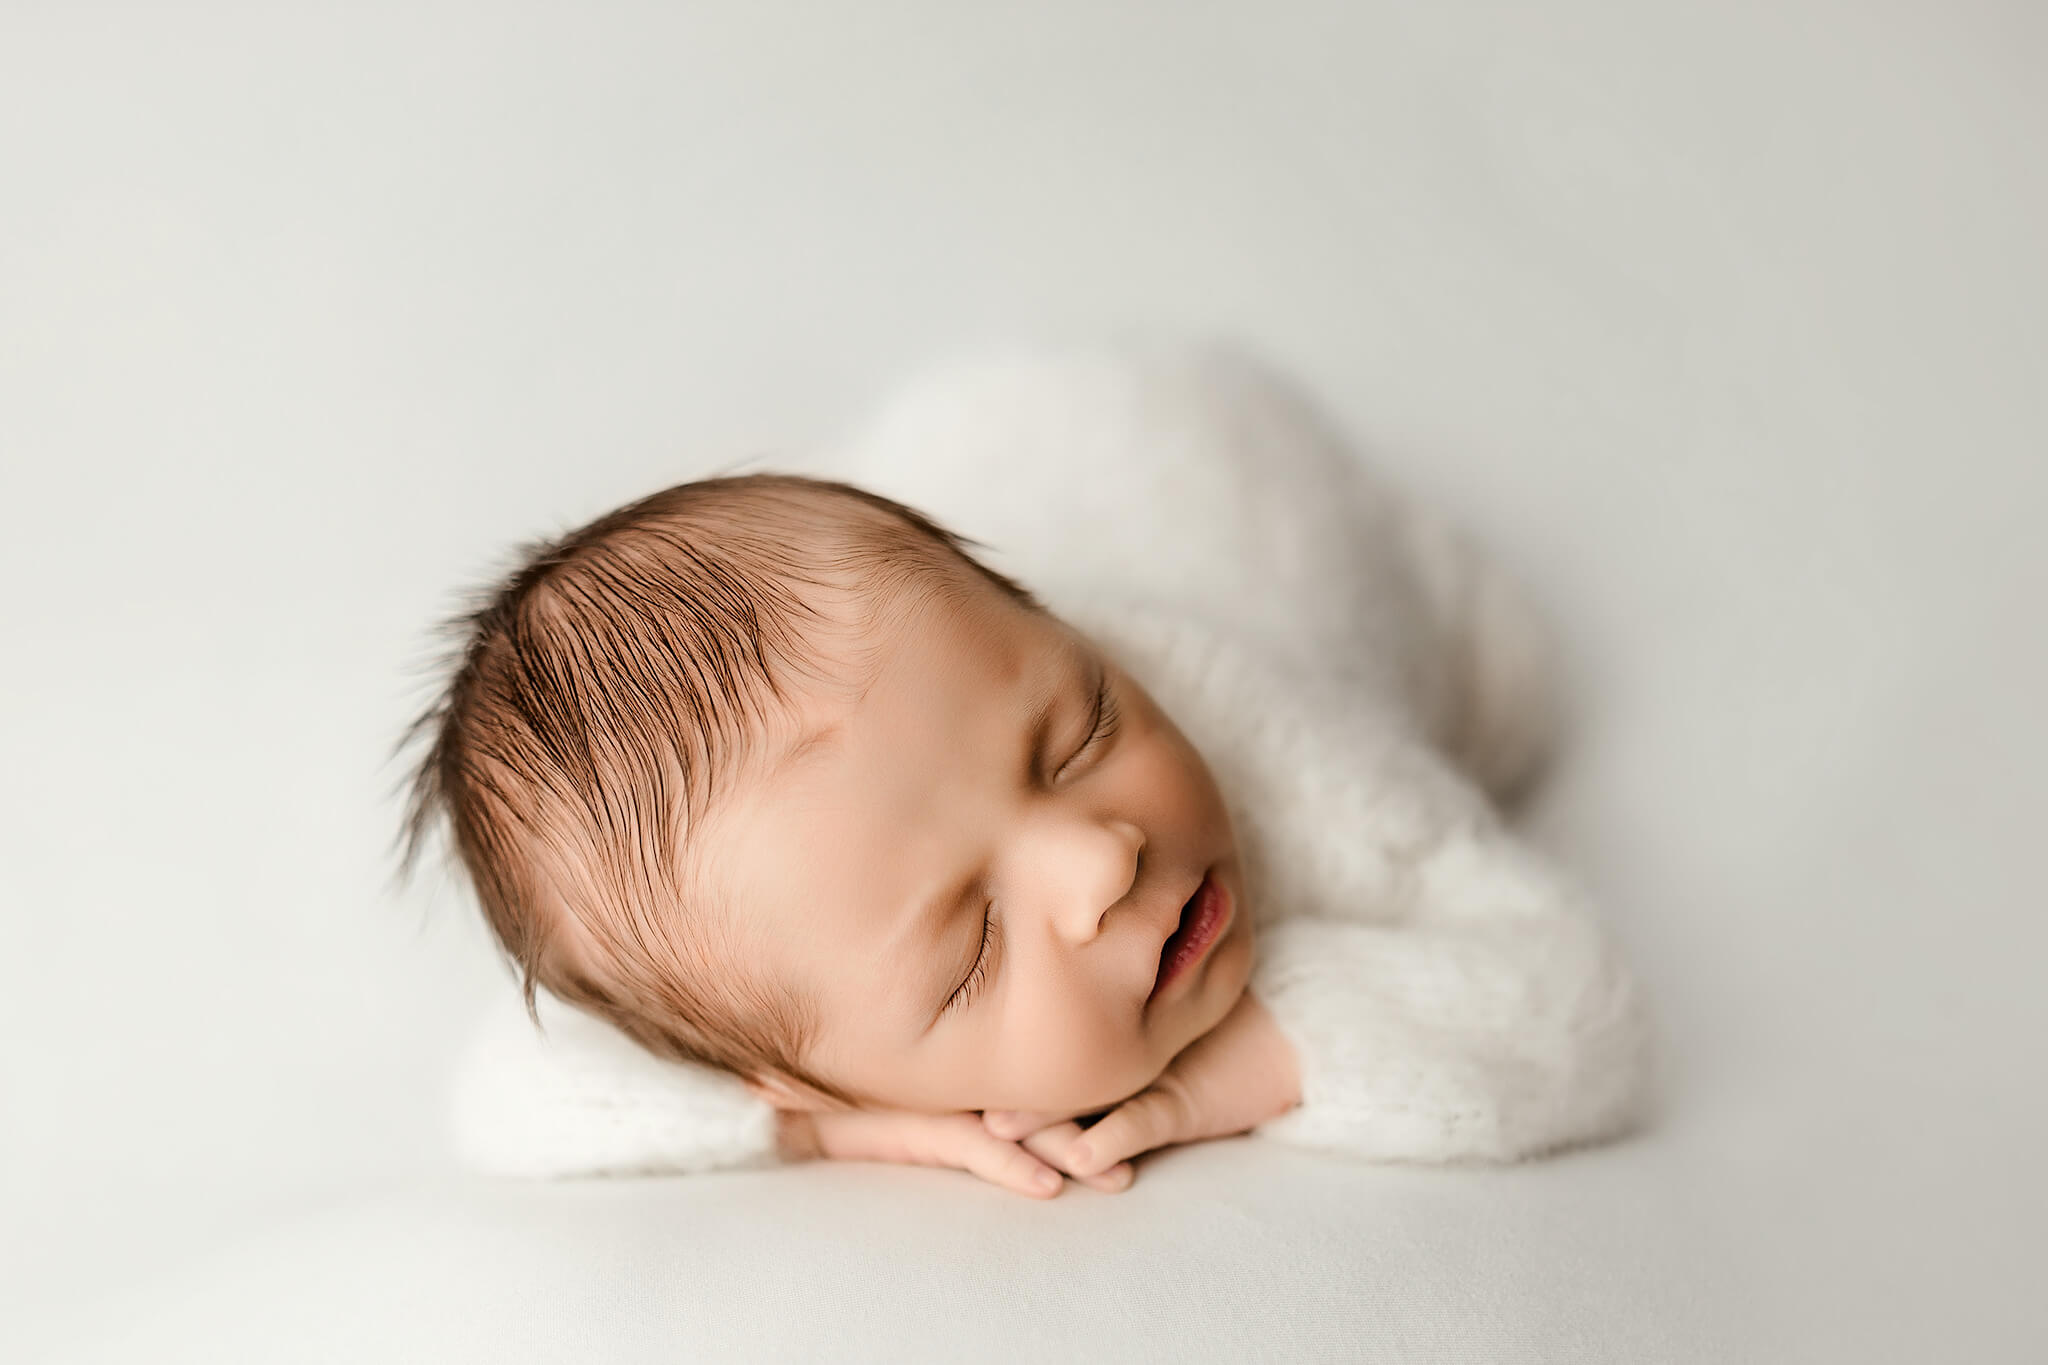 baby posed in all white by woodstock newborn photographer alexes Renea